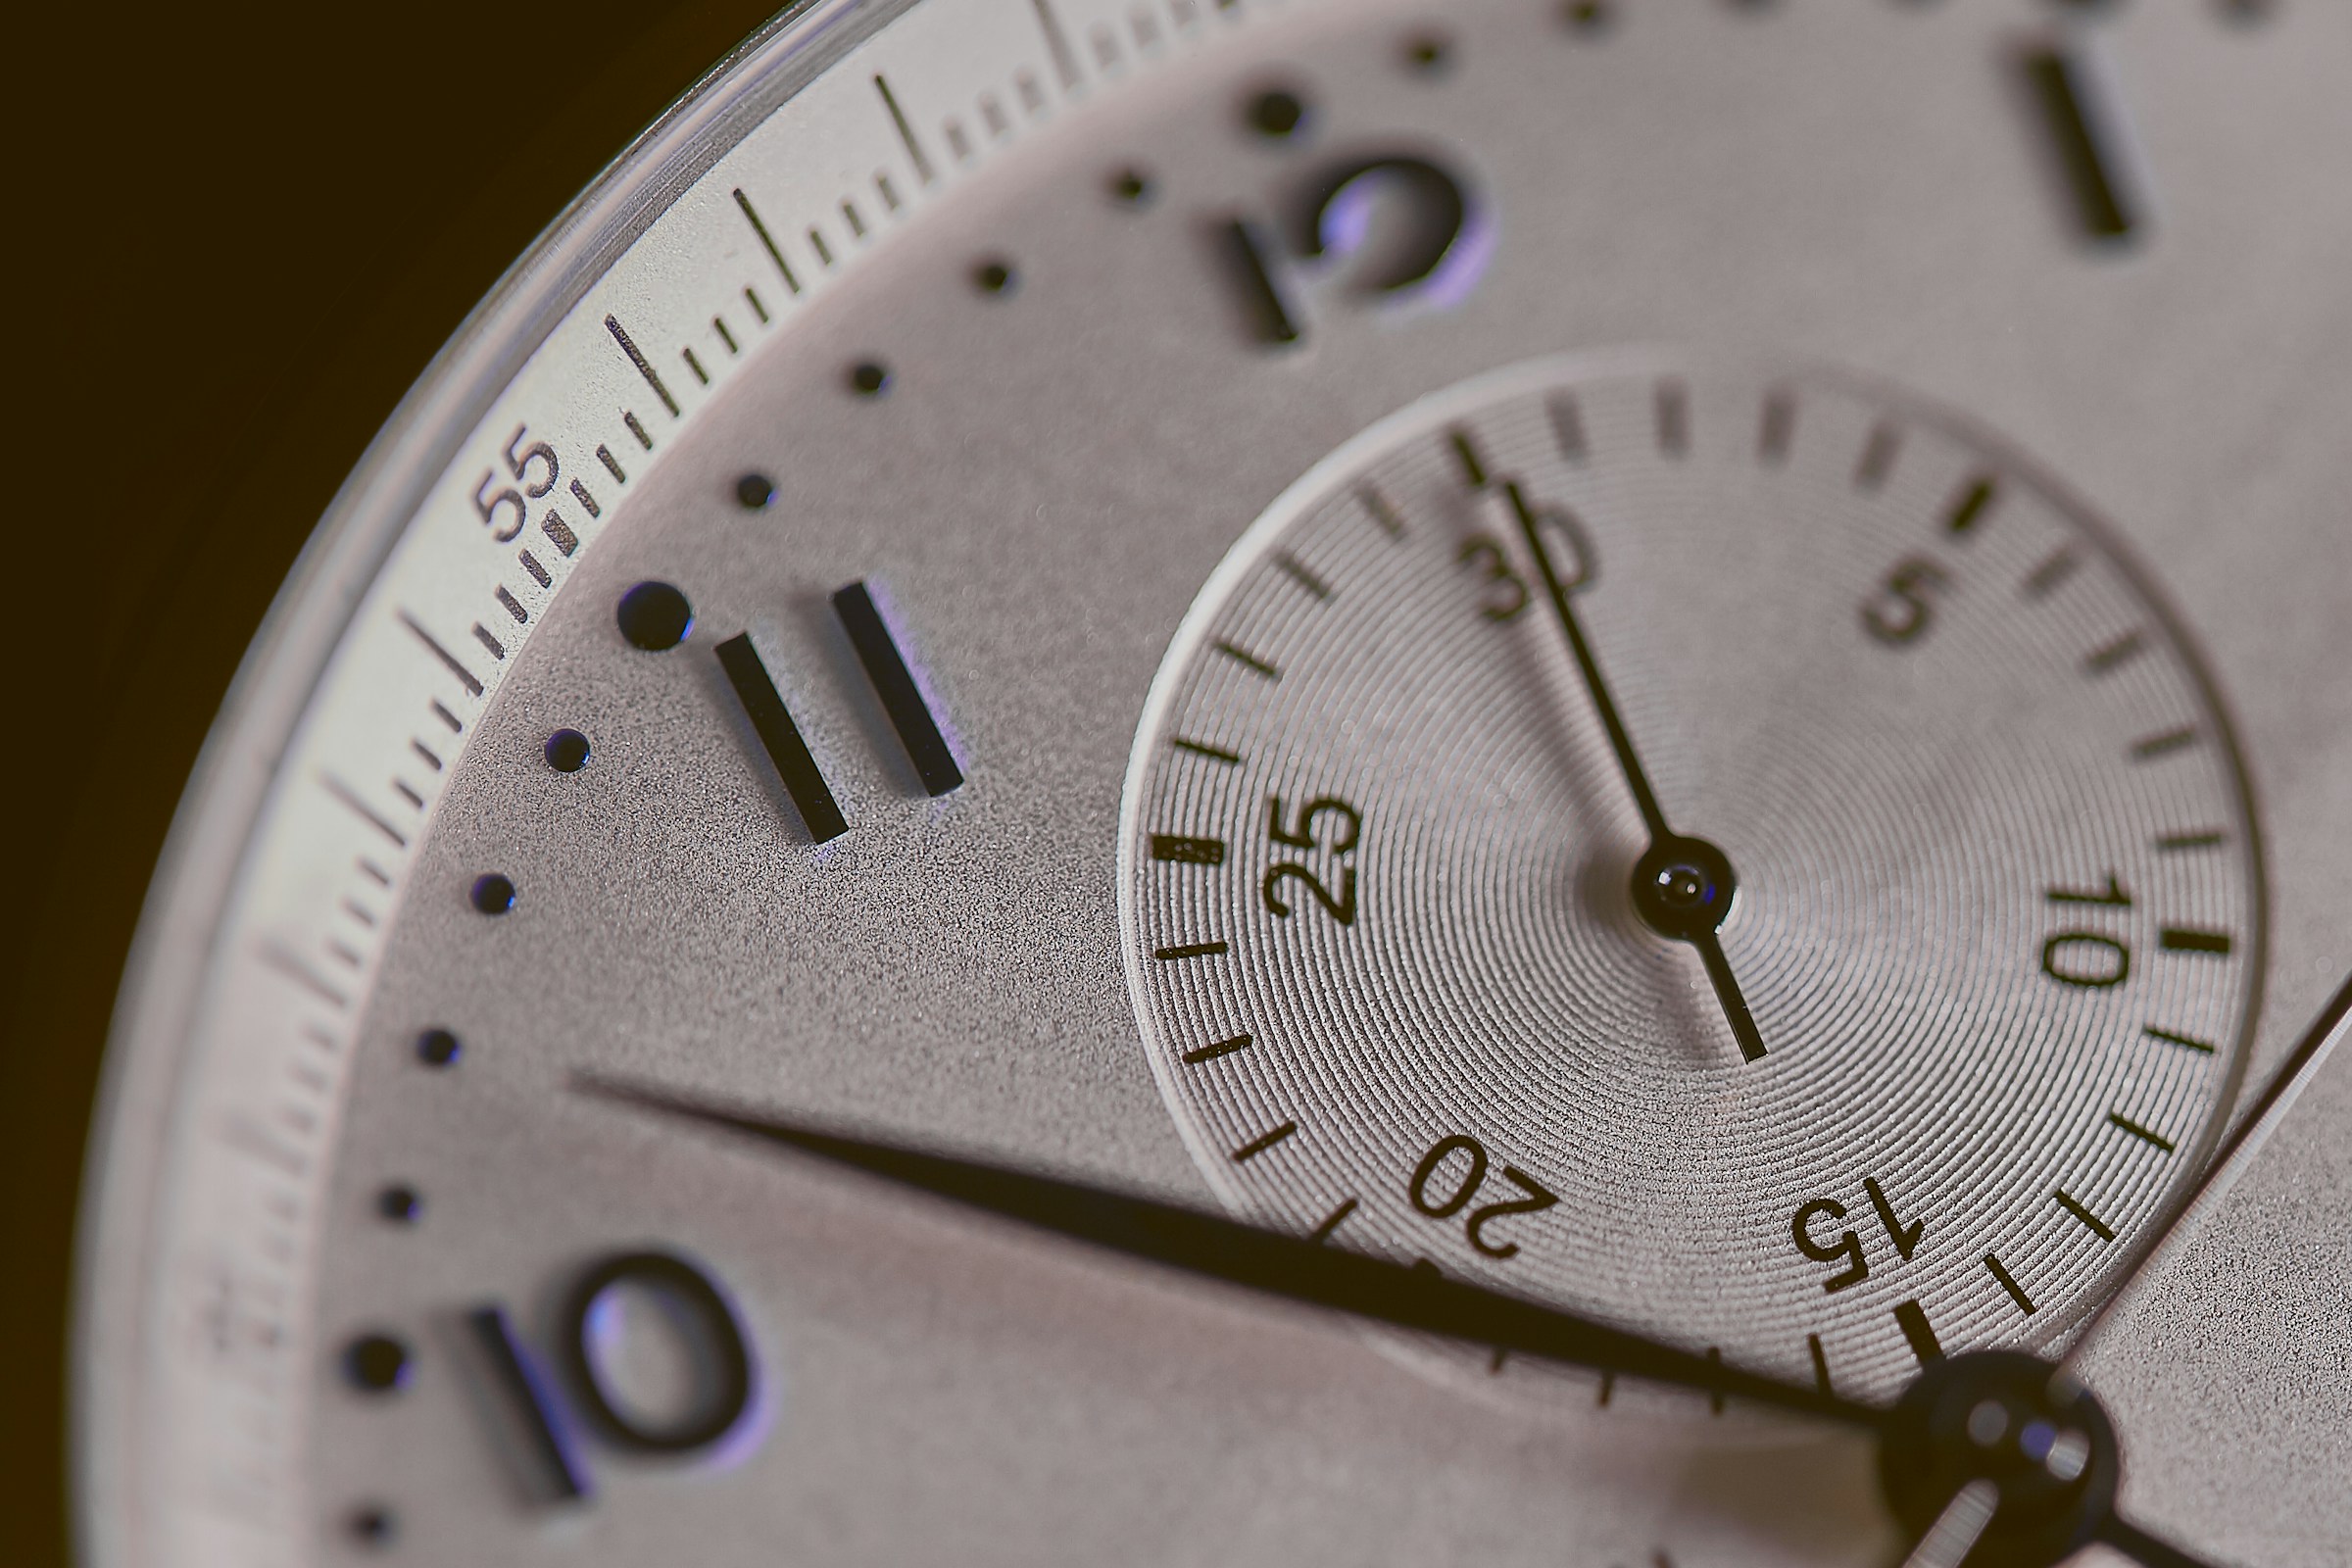 A close up of a dial on a wristwatch. We also see a chronograph on the dial, and the dial is white with blue numbers.